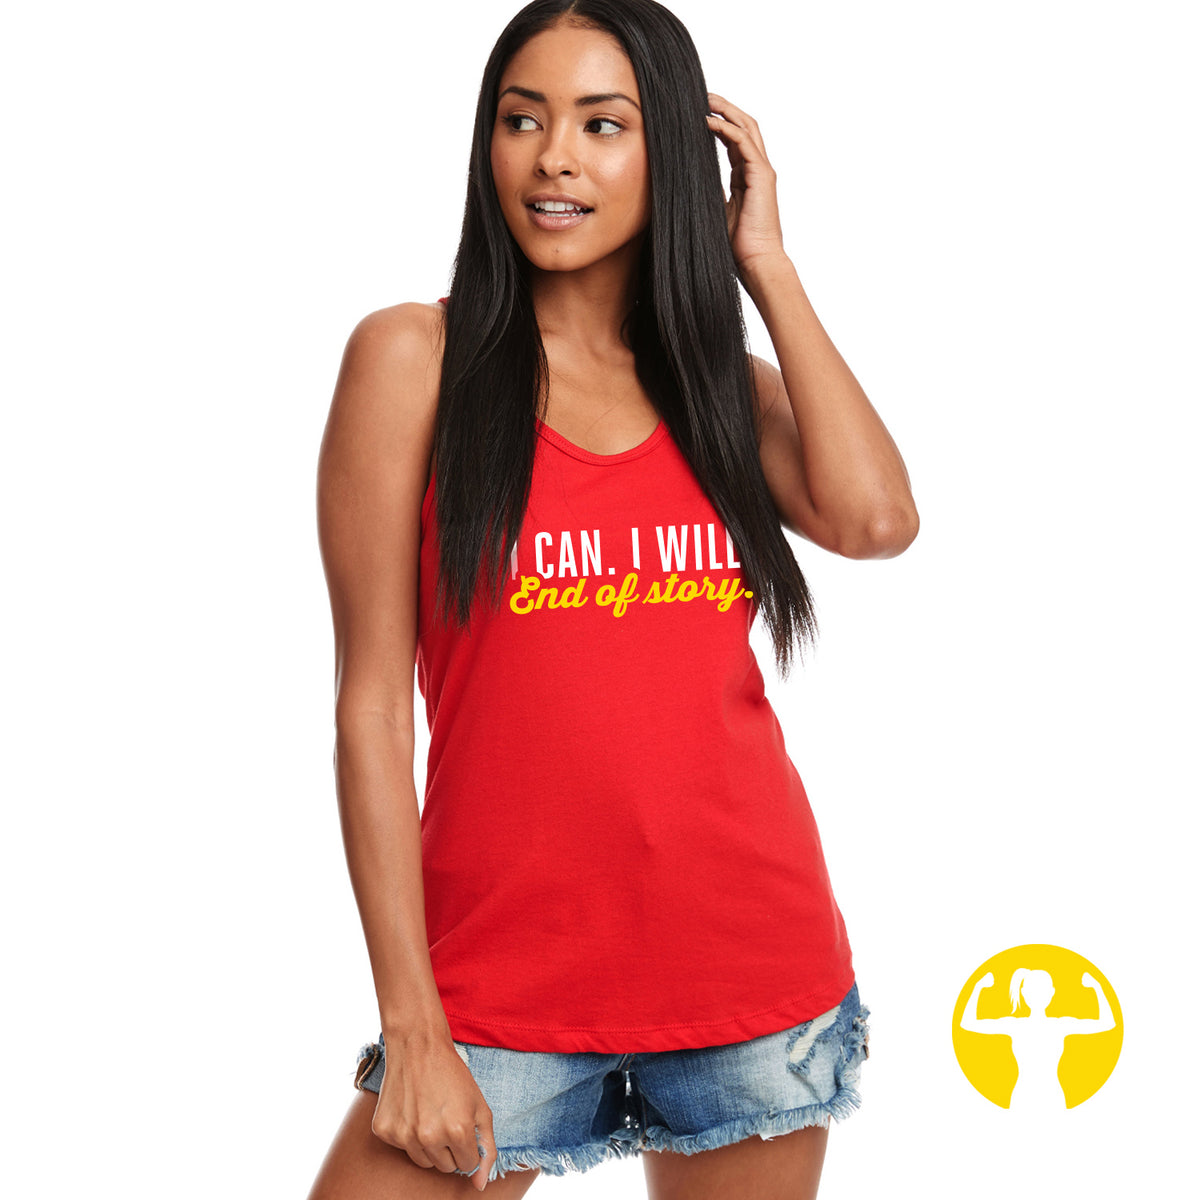 I Can. I Will. End of Story. Gym Tanks for Women